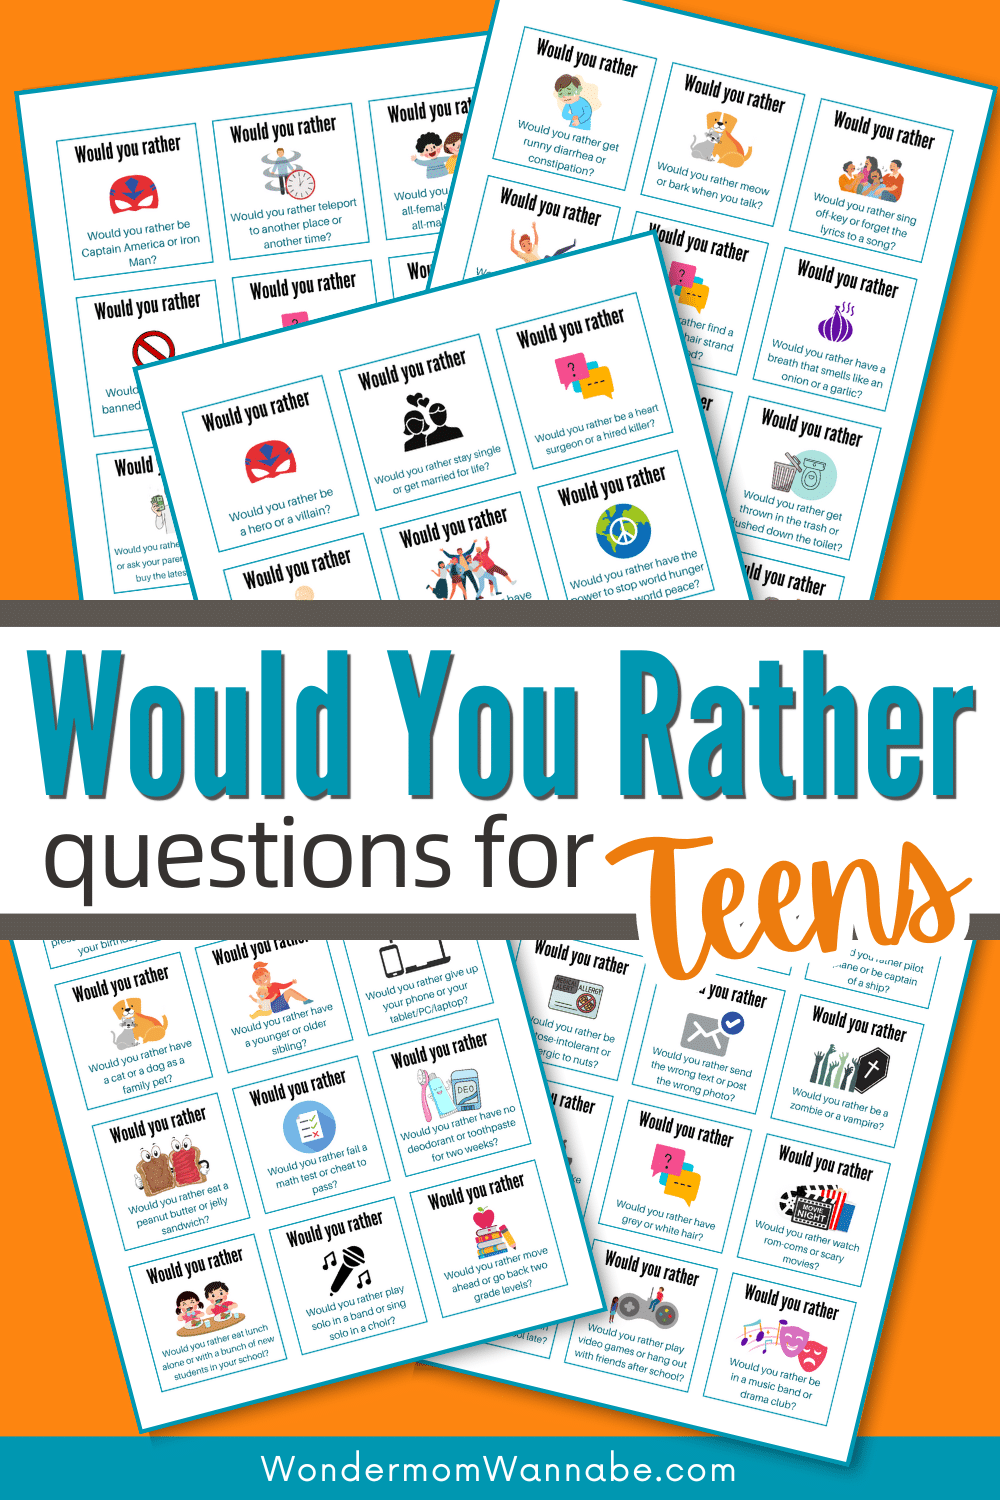 Would you rather questions for adolescents.